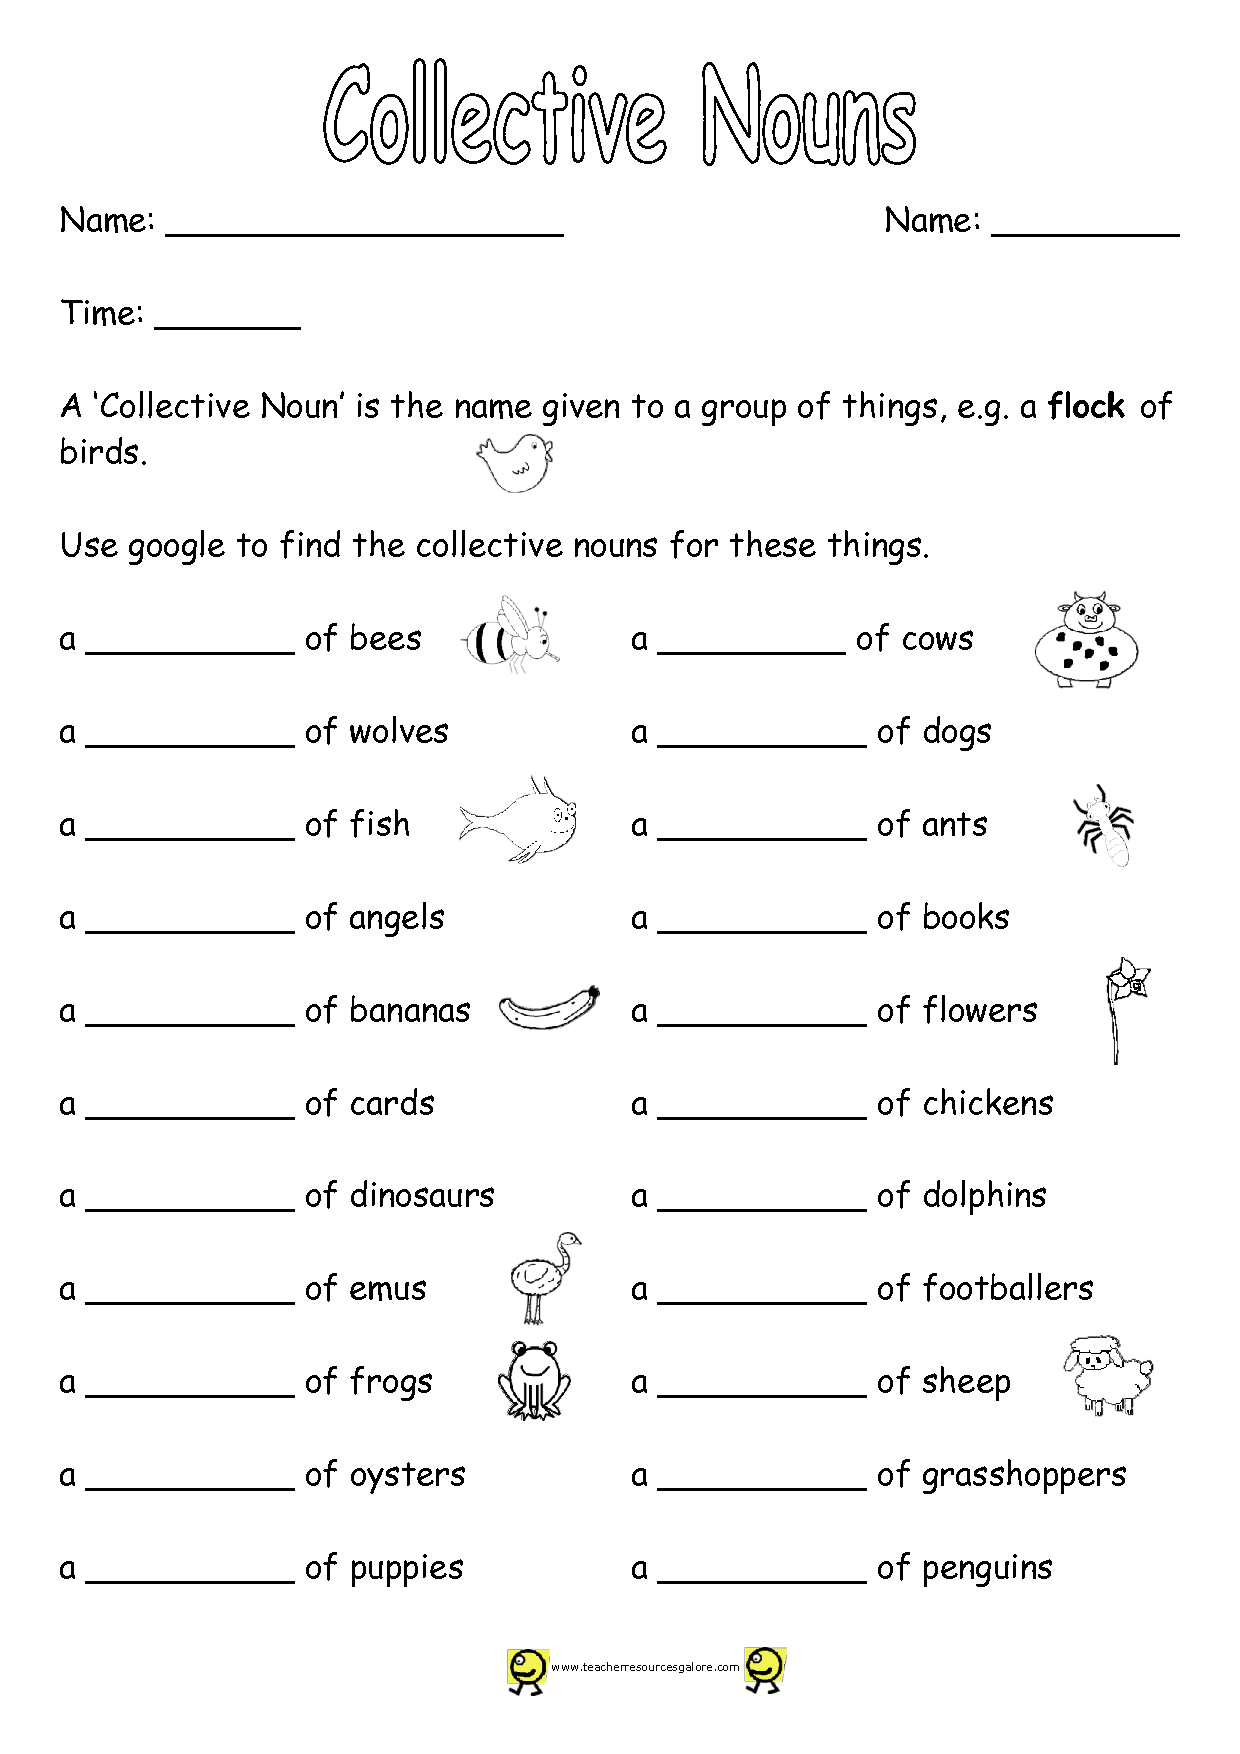 18-best-images-of-collective-nouns-2nd-grade-worksheet-collective